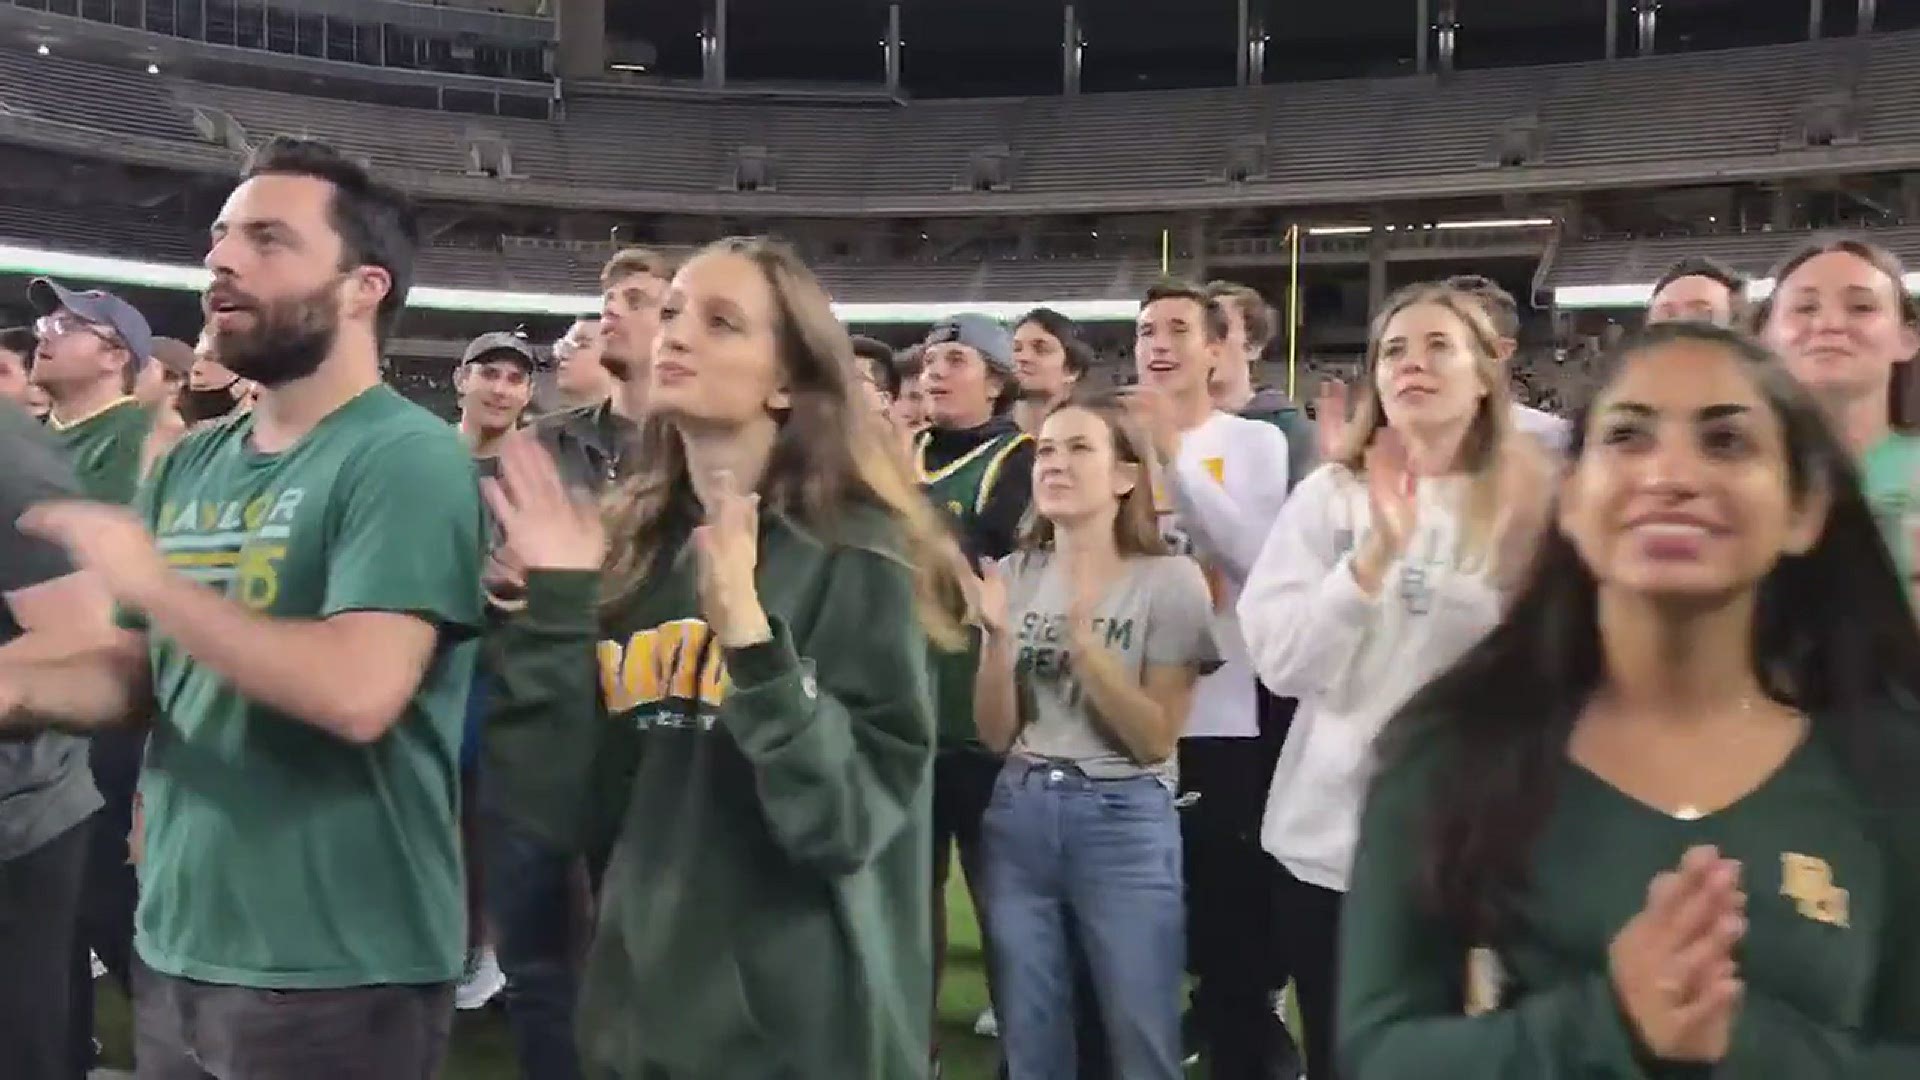 Though the final match is happening in Indianapolis, Baylor Bears fans are cheering on their team loud at McLane Stadium.
Credit: Bary Roy